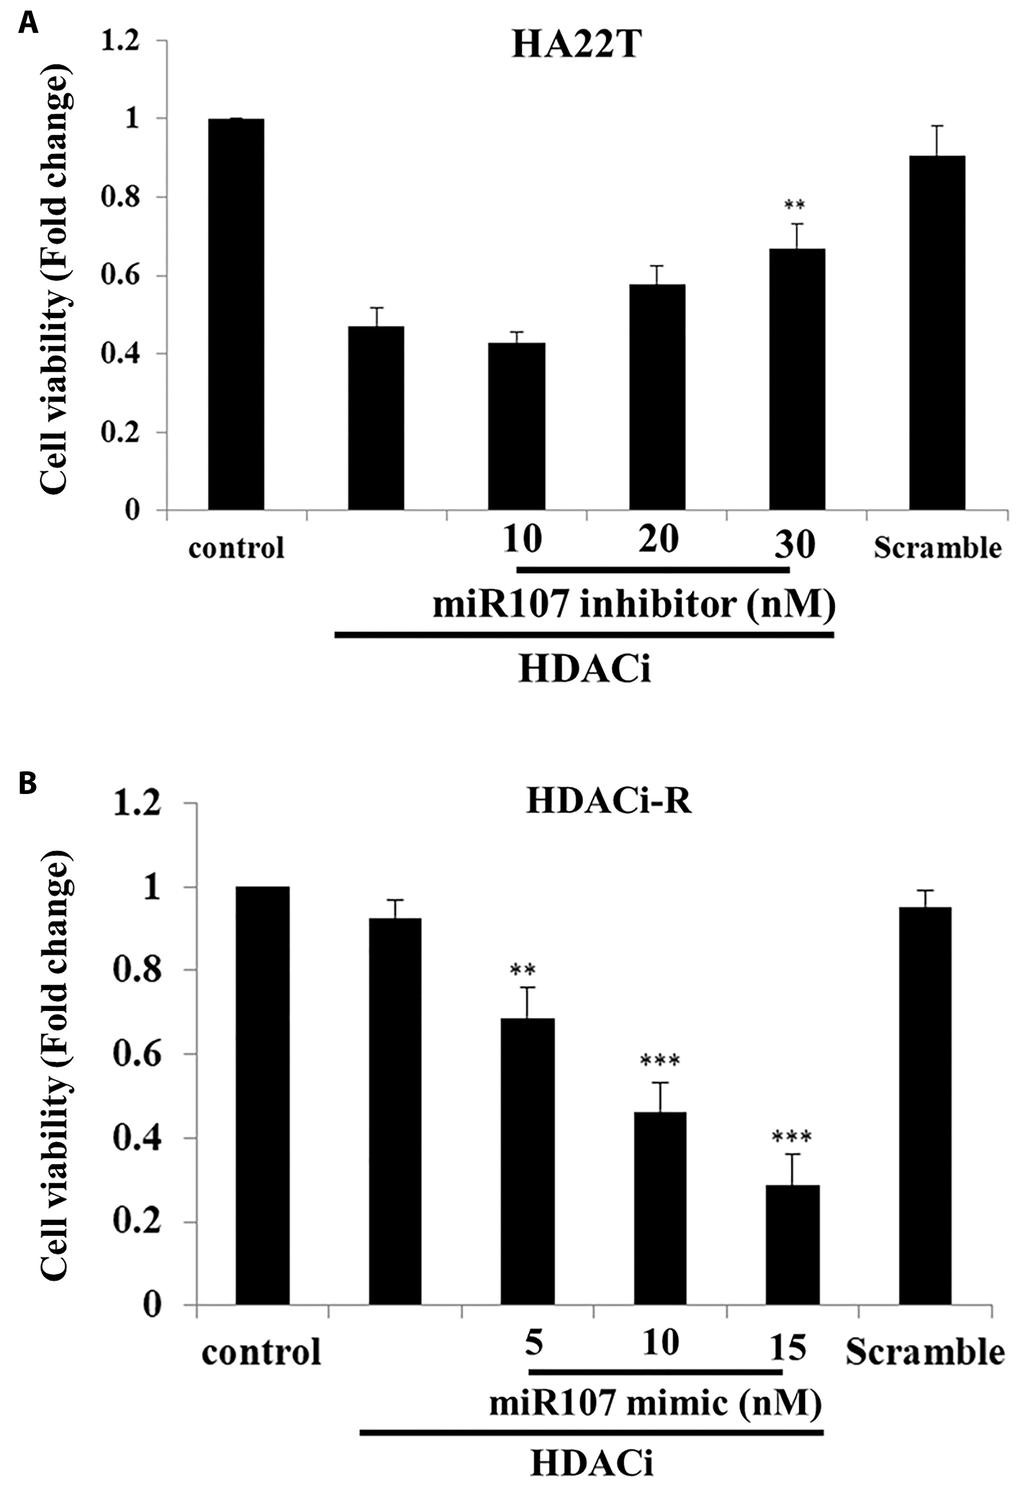 MicroRNA-107 (miR-107) enhanced chemosensitivity in hepatocellular carcinoma (HCC) cells. (A) Knockdown of expression of miR-107 prevented HDACi (histone deacetylase inhibitor)-induced downregulation of cell viability in HA22T cells, as assessed with MTT (3-(4,5-dimethylthiazol-2-yl)-2,5-diphenyl tetrazolium bromide) assay. (B) Upregulation of miR-107 enhanced chemosensitivity in HDACi-R cells, as assessed with MTT assay. Scramble miRNA group treated with 15 μM.